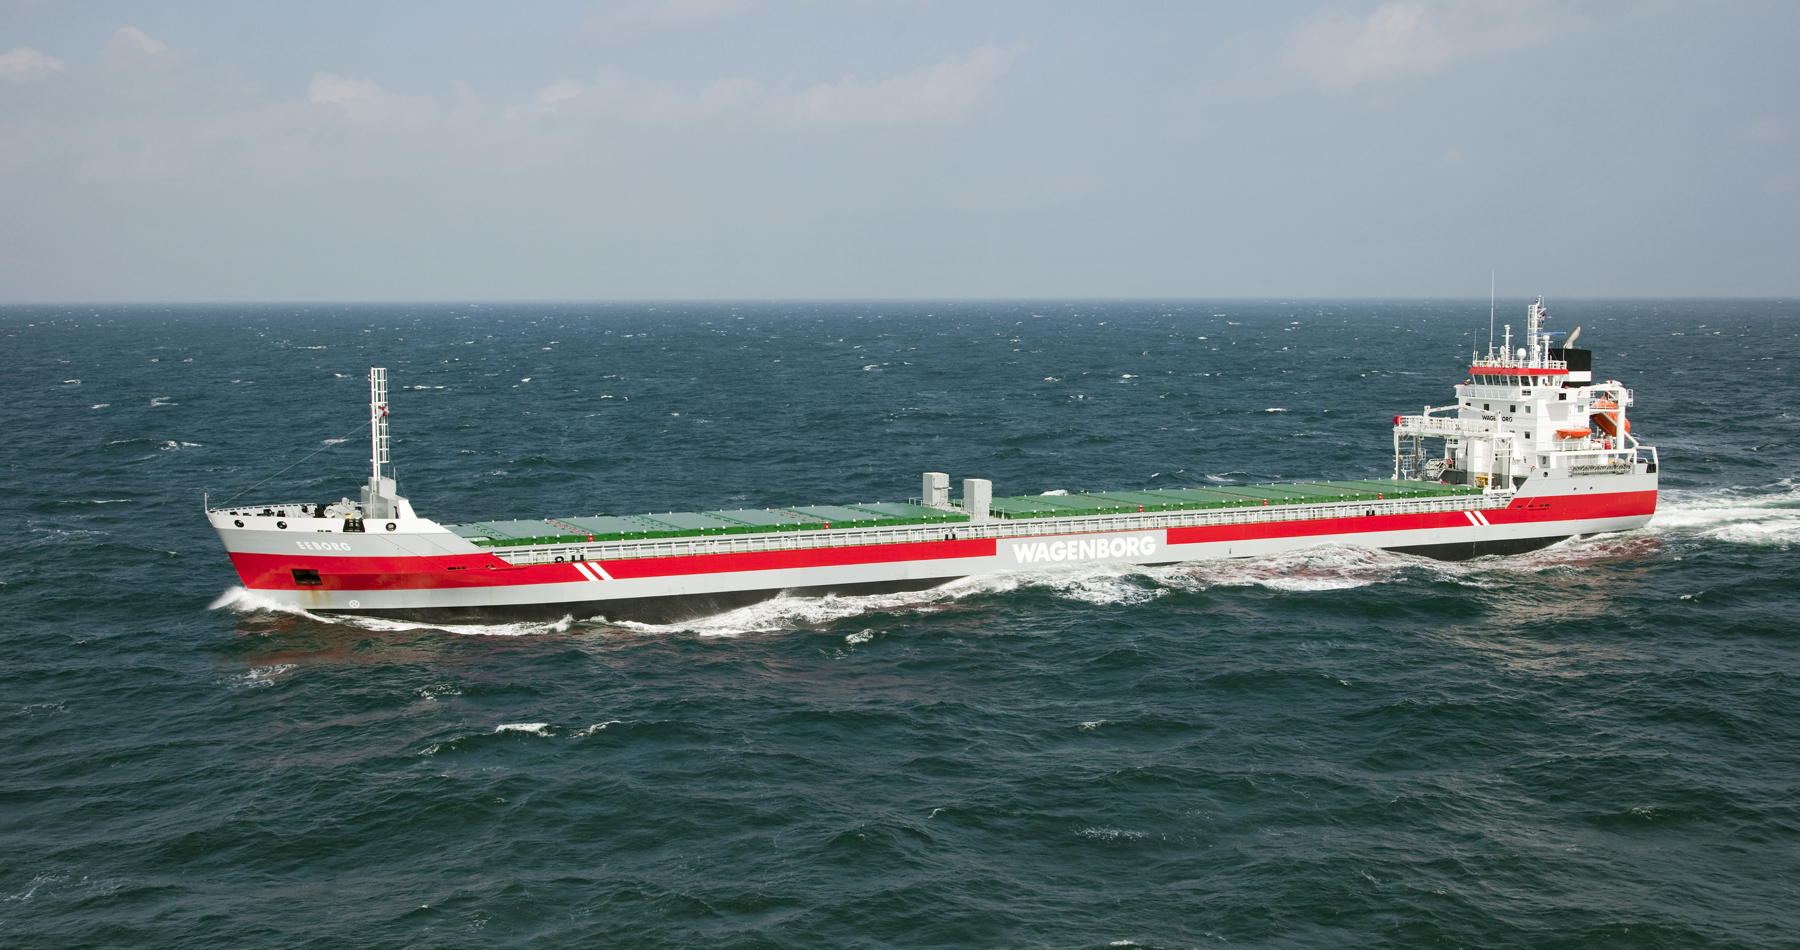 MV Eeborg 1st Wagenborg vessel in the Lakes for 2020